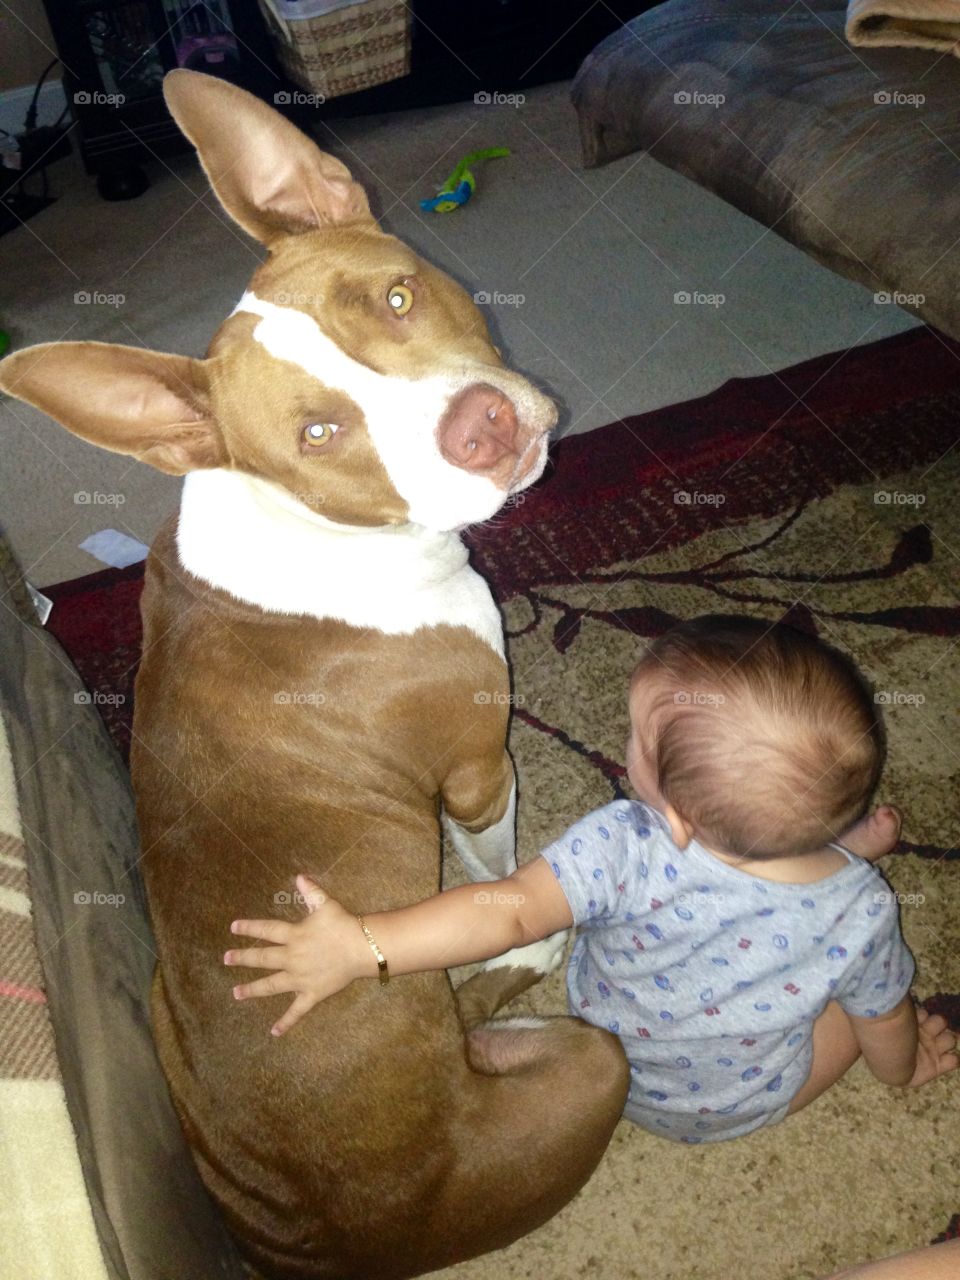 Pit bull and baby